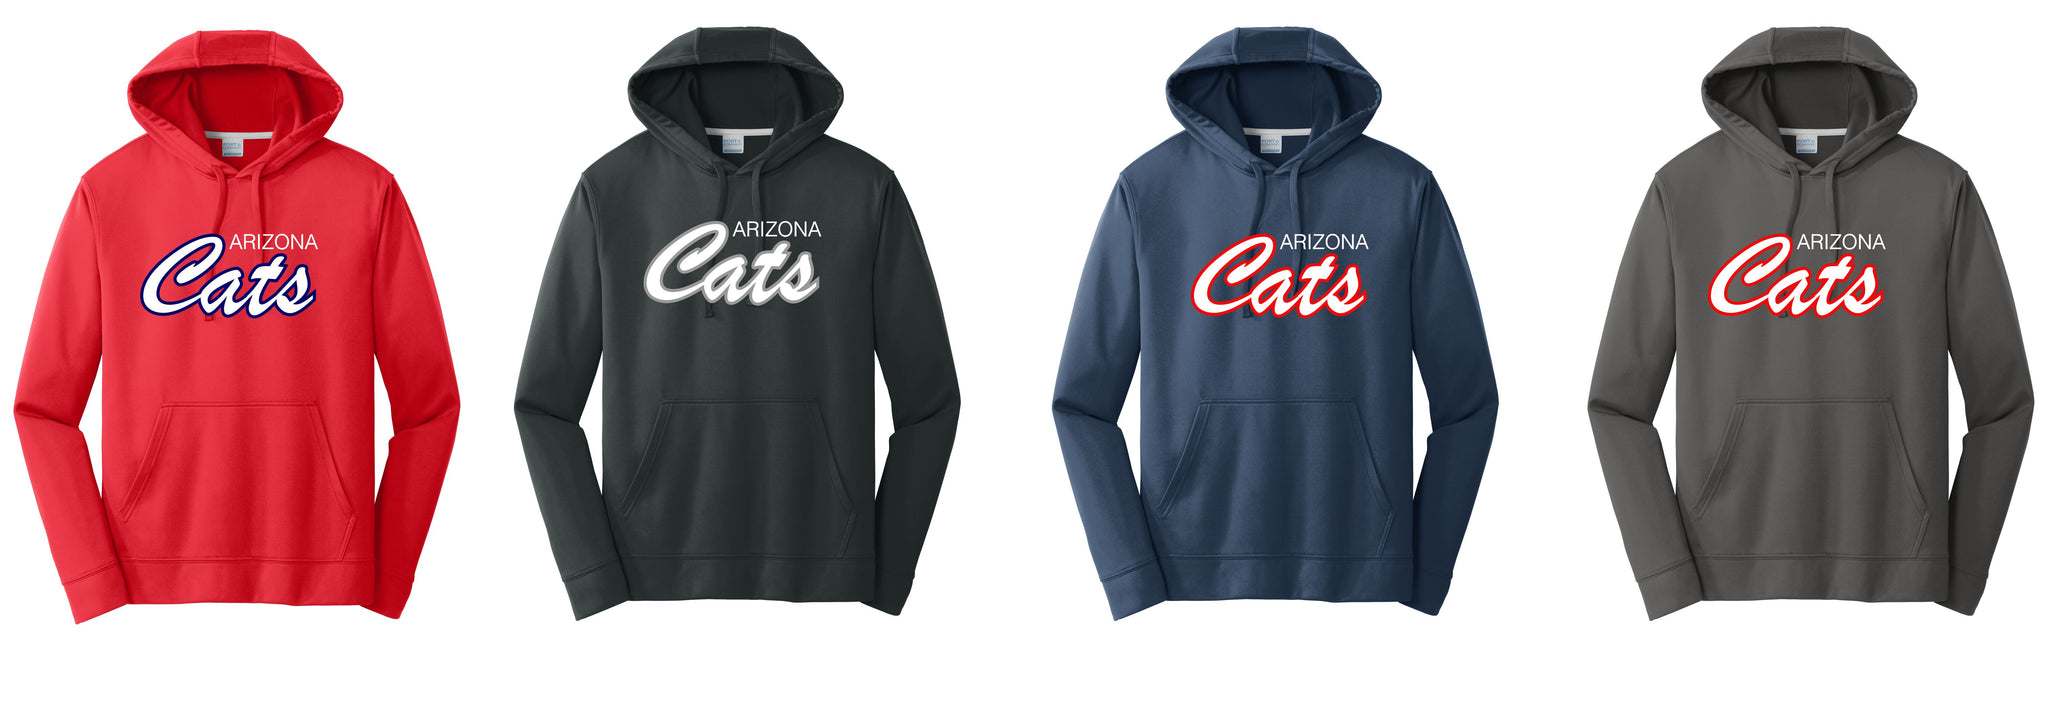 Arizona Cats - PC850H Performance Hoodie Twill with embroidery